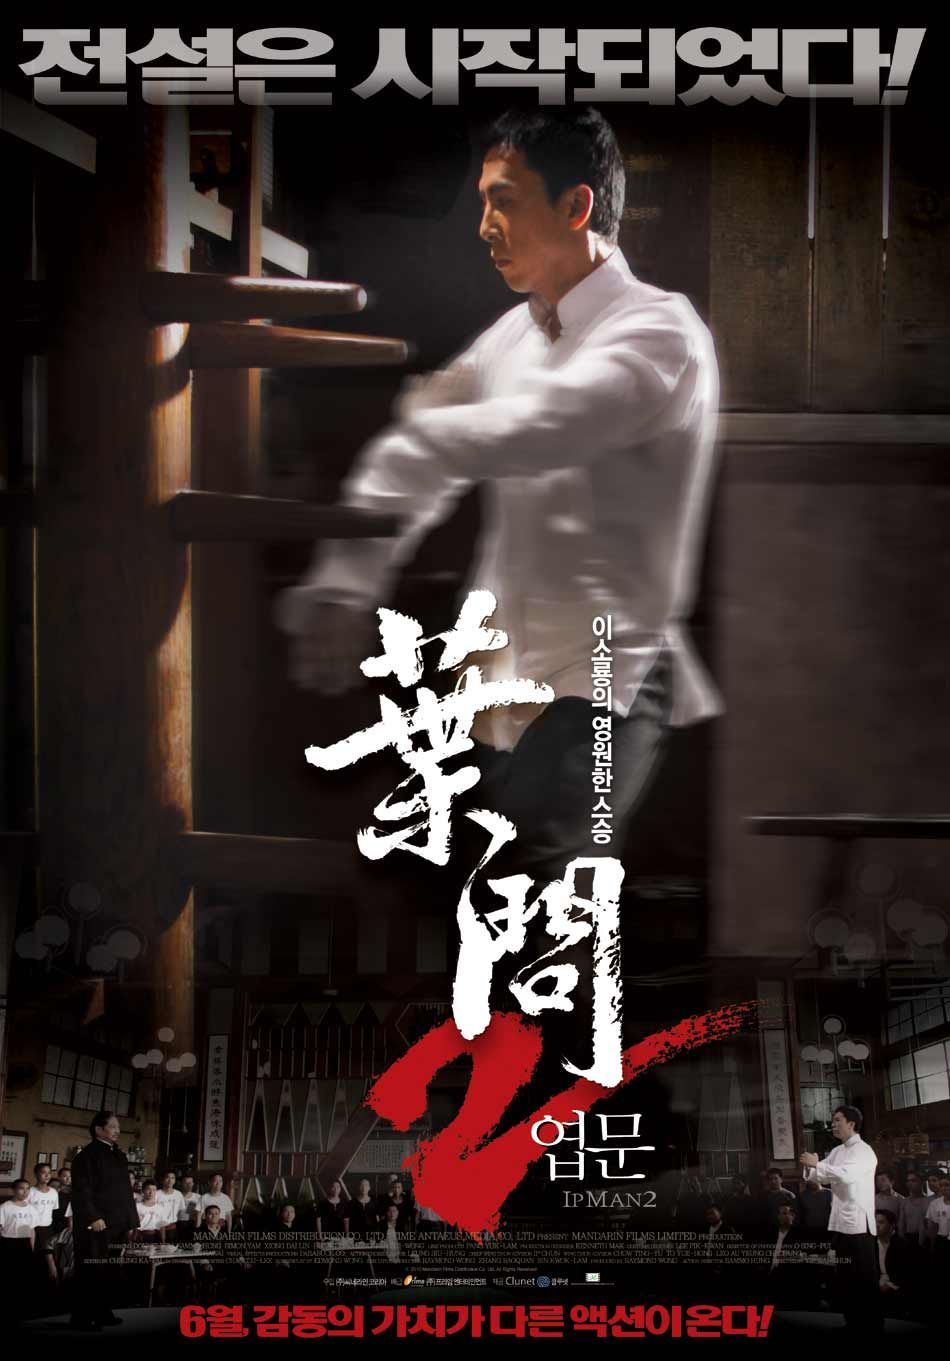 Extra Large Movie Poster Image for Yip Man 2 (#9 of 10)